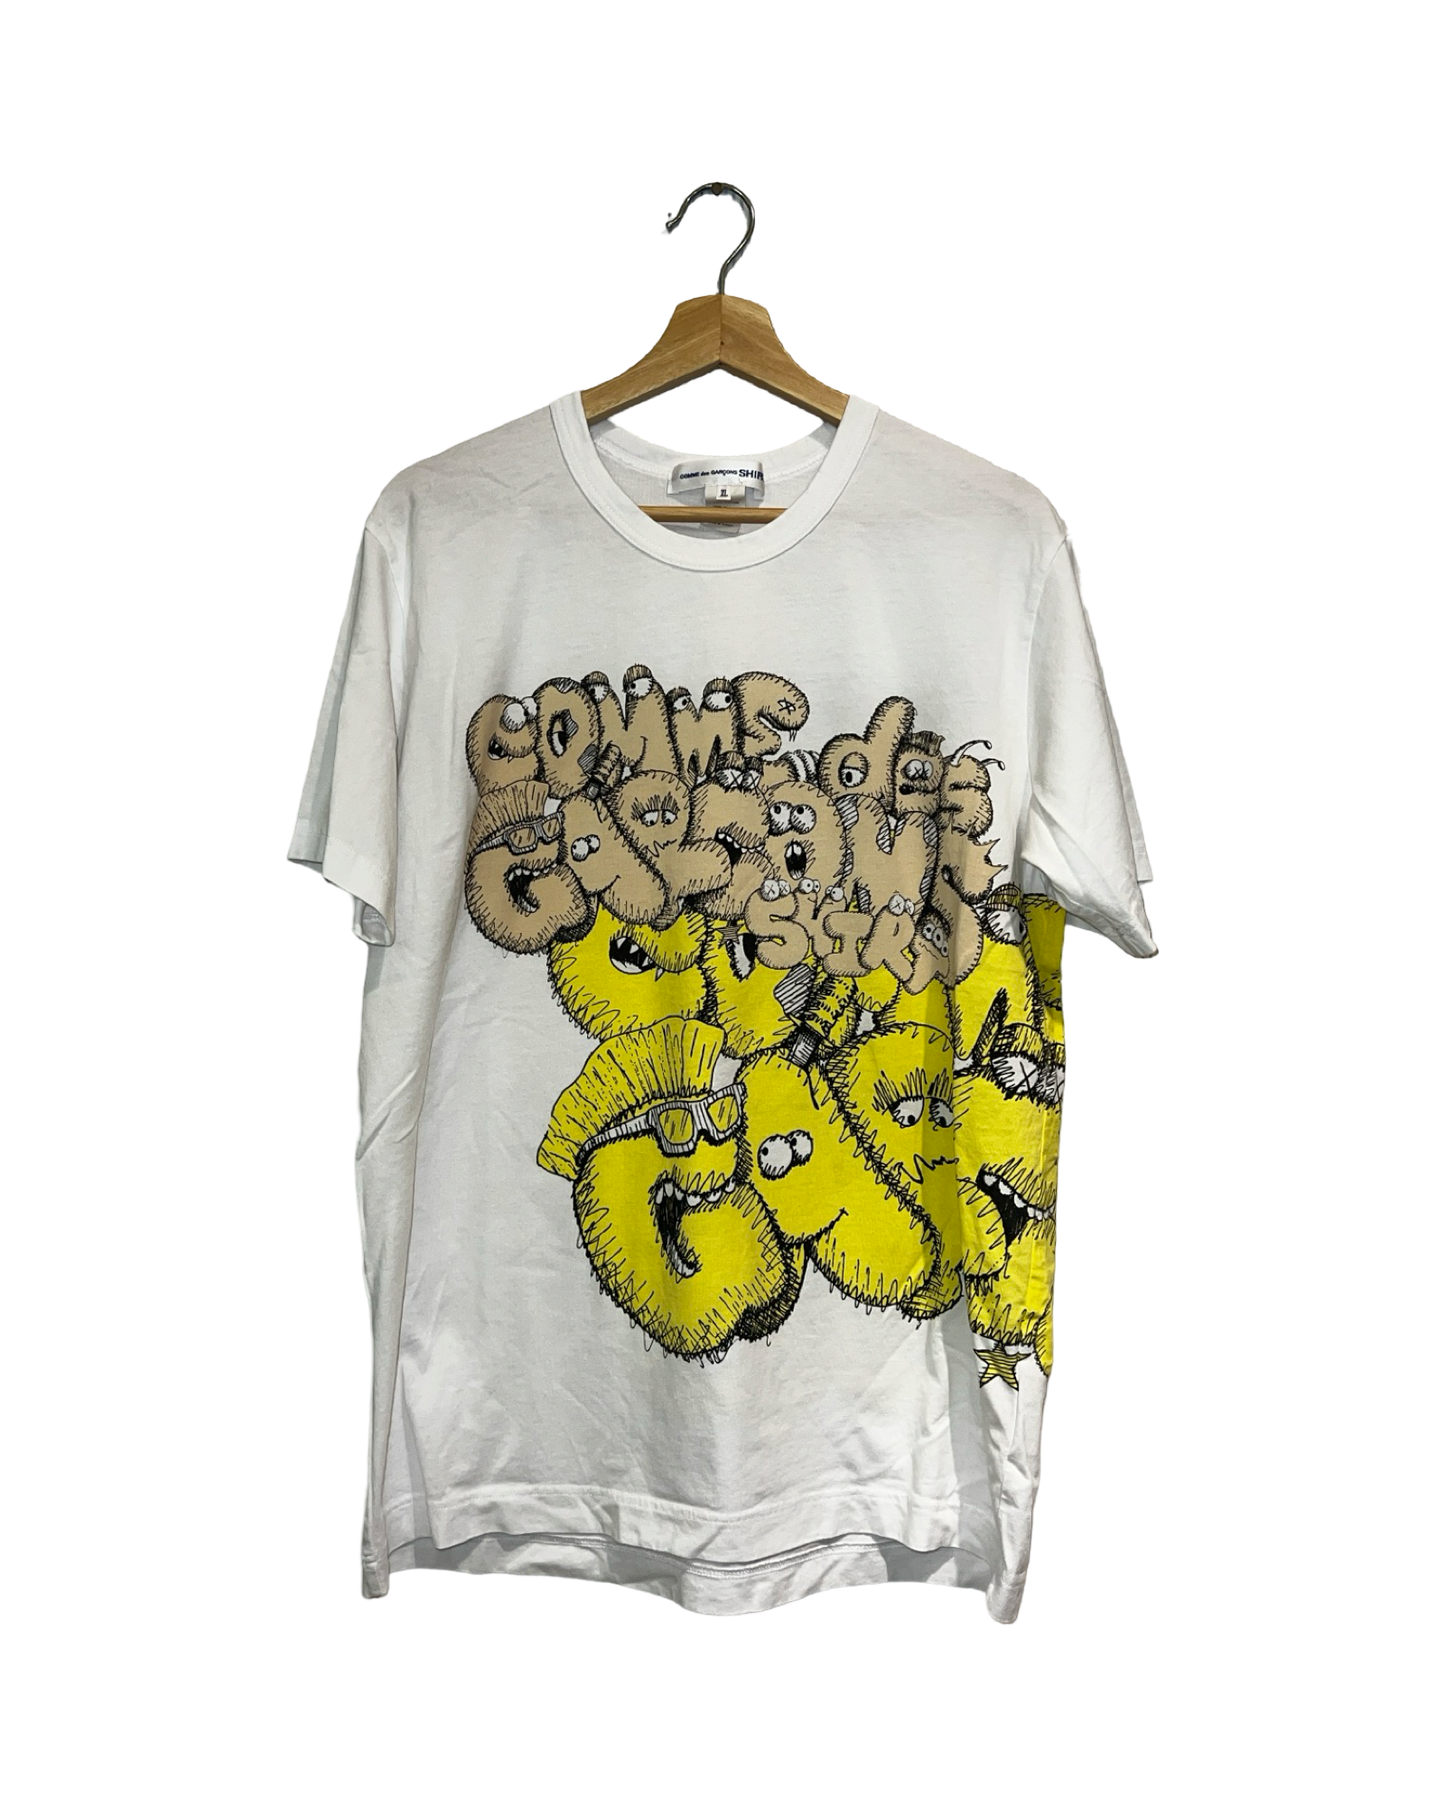 Archive KAWS x Comme Des Garcons Yellow Tee